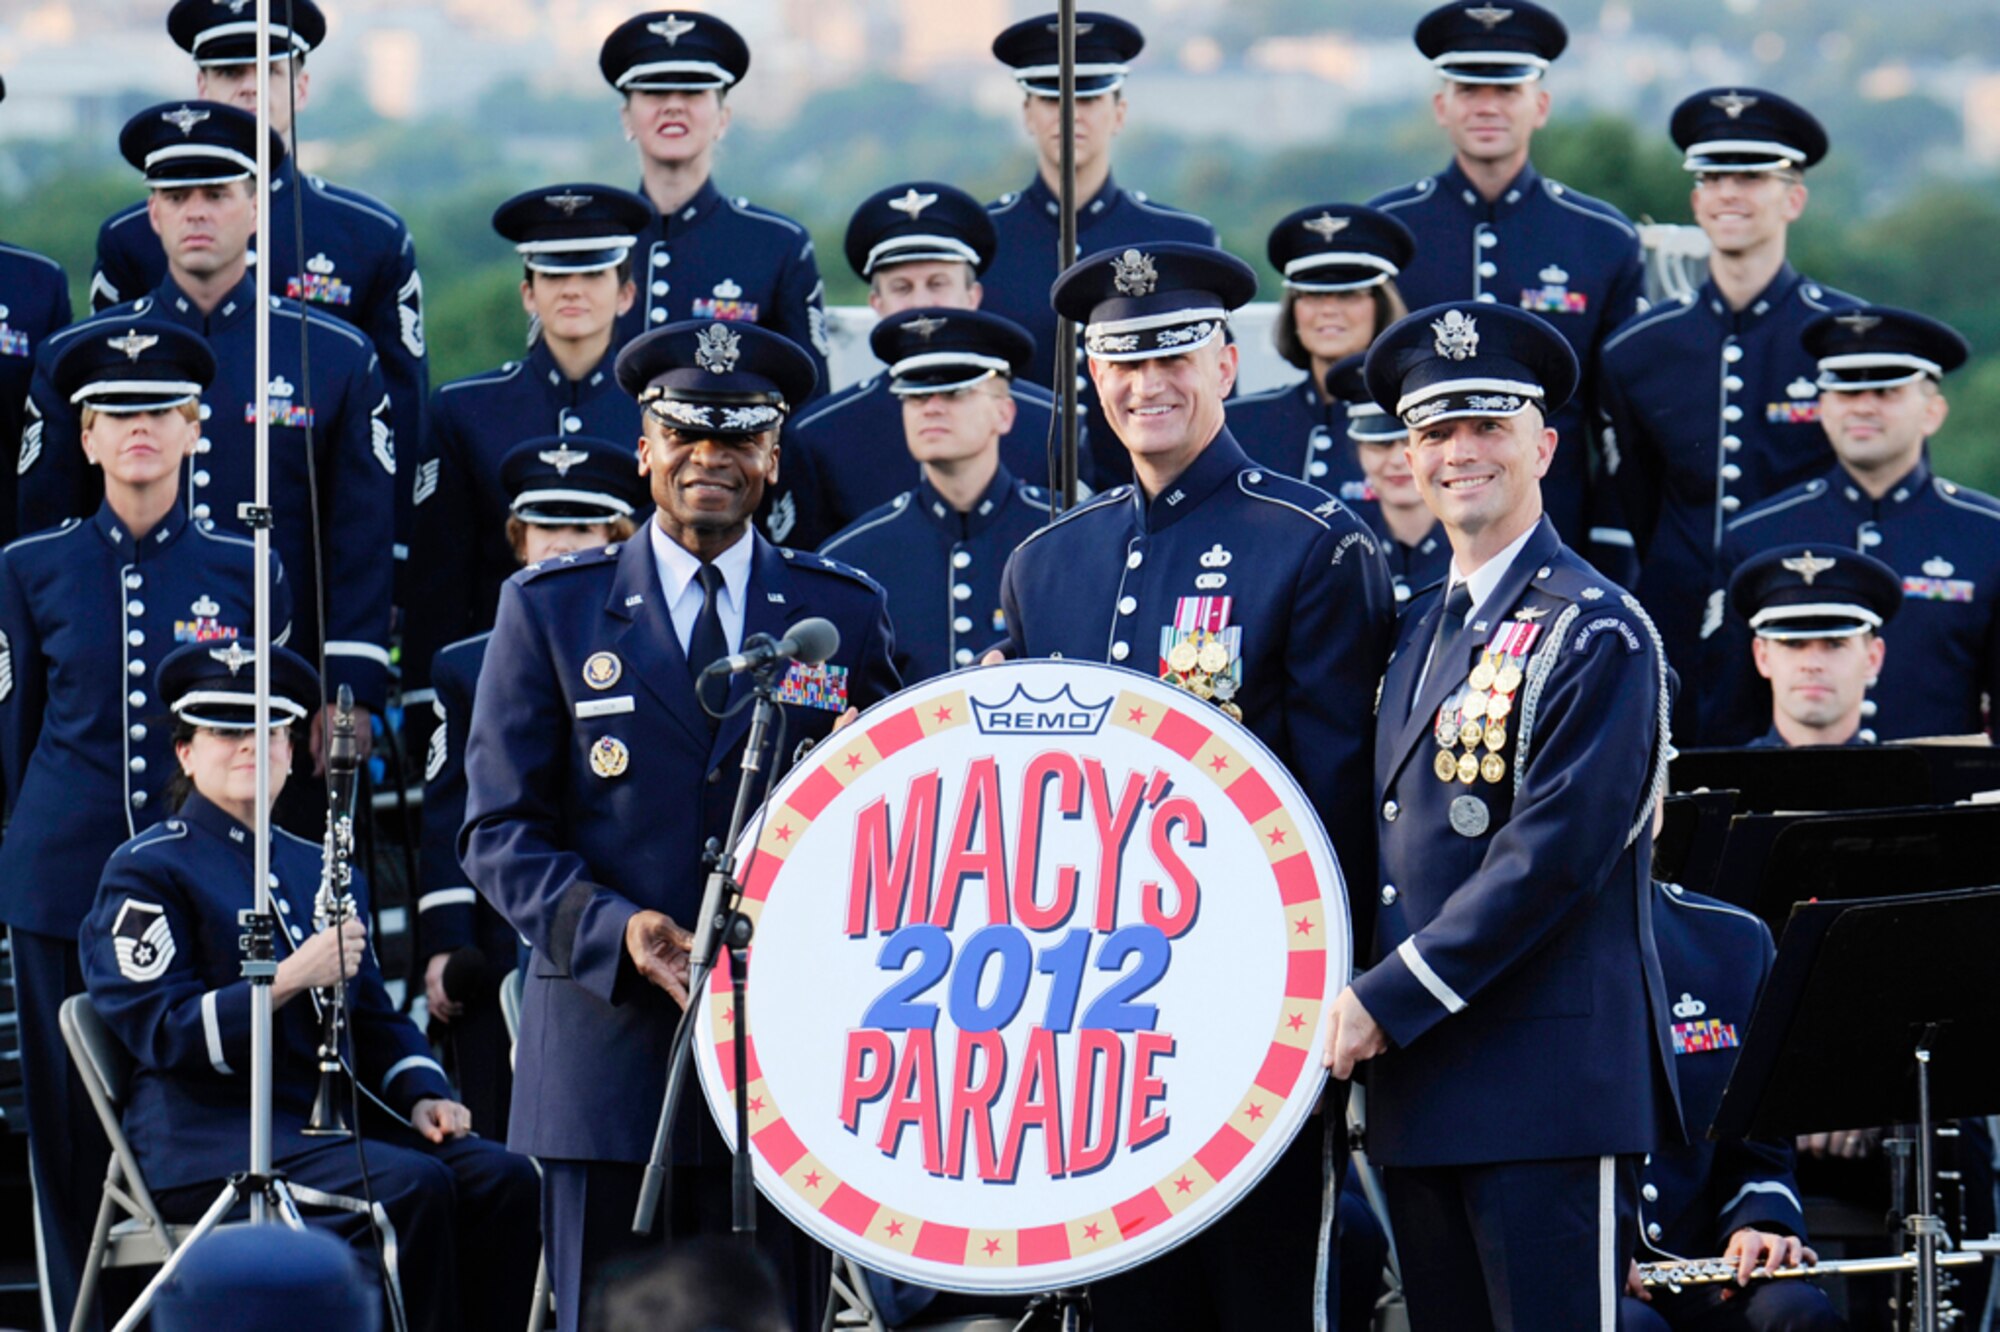 Maj. Gen. Darren W. McDew, Col. A. Phillip Waite and Lt. Col. Raymond Powell display the Macy’s Day Parade emblem June 4, at The Air Force Memorial, Arlington, Va, after receiving an invite for the U.S. Air Force Band and U.S. Air Force Honor Guard to perform during the 2012 parade. Originally known as the Christmas Macy’s Day Parade, the annual event began in 1924, and is now known as the Macy’s Day annual Thanksgiving Parade. (U.S. Air Force photo by Staff Sgt. Raymond Mills)